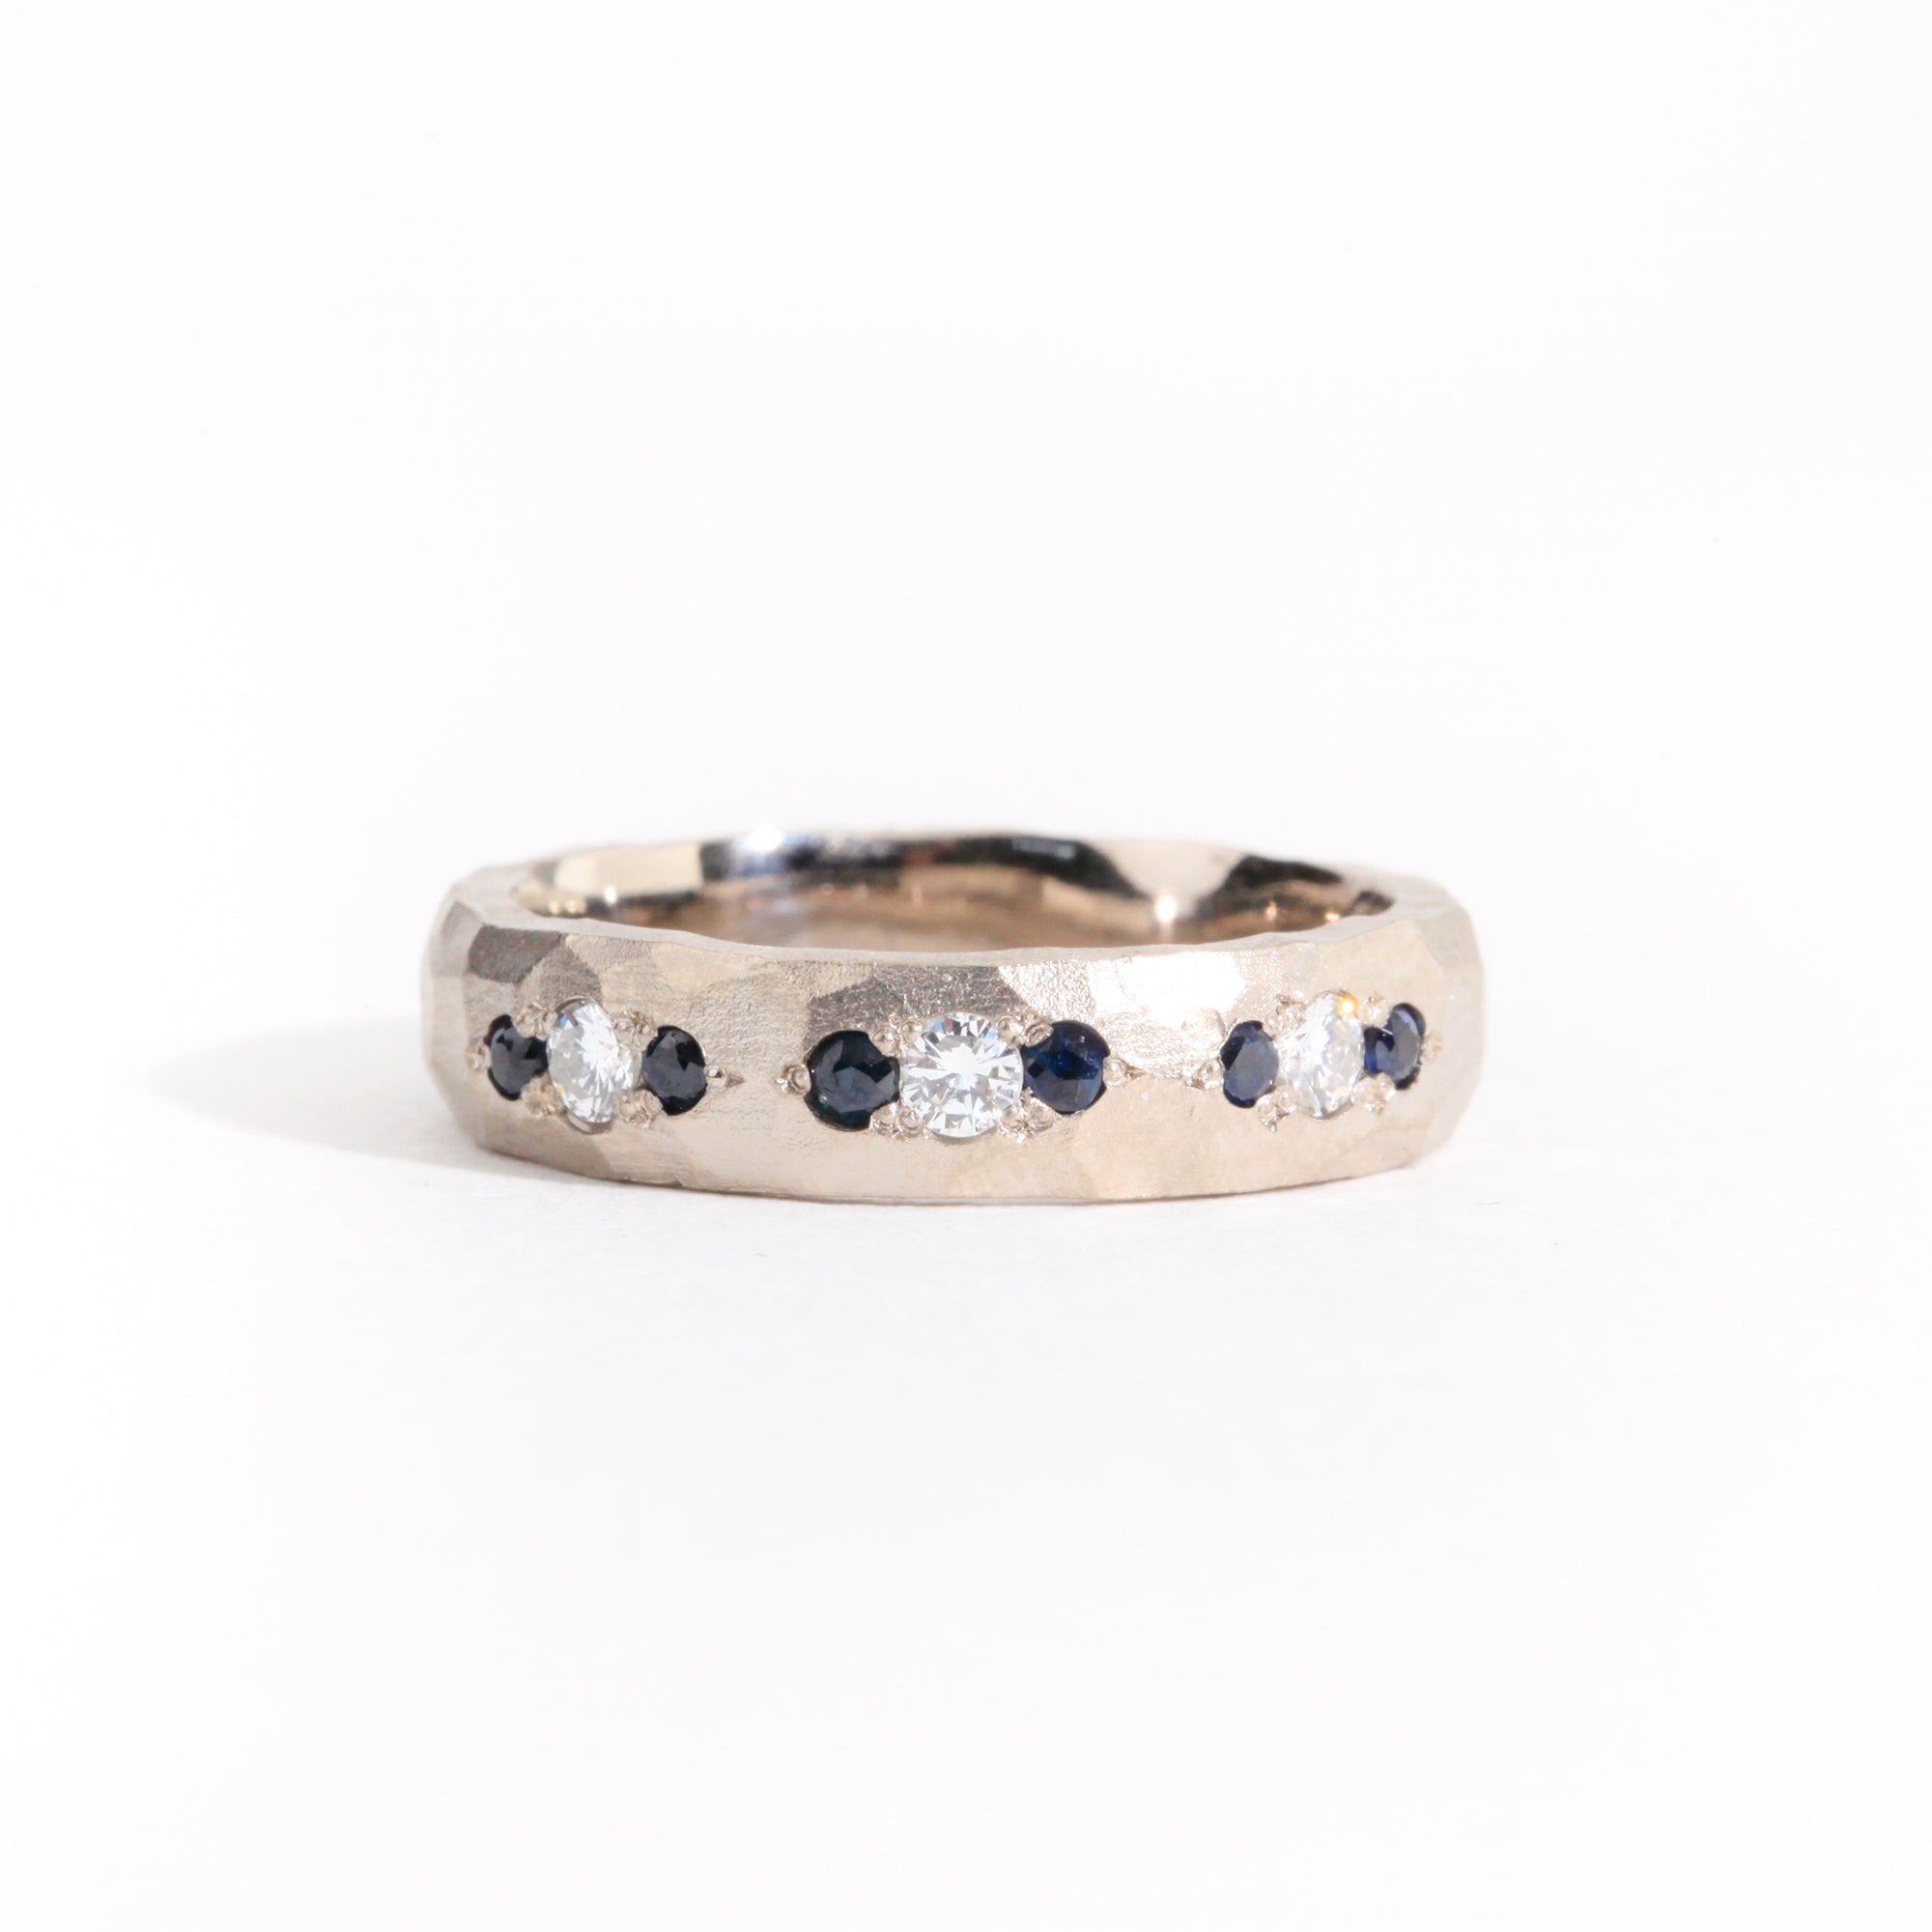 Hammered 18 carat white gold men's wedding band, set with ethically sourced Australian sapphires and conflict free diamonds. 